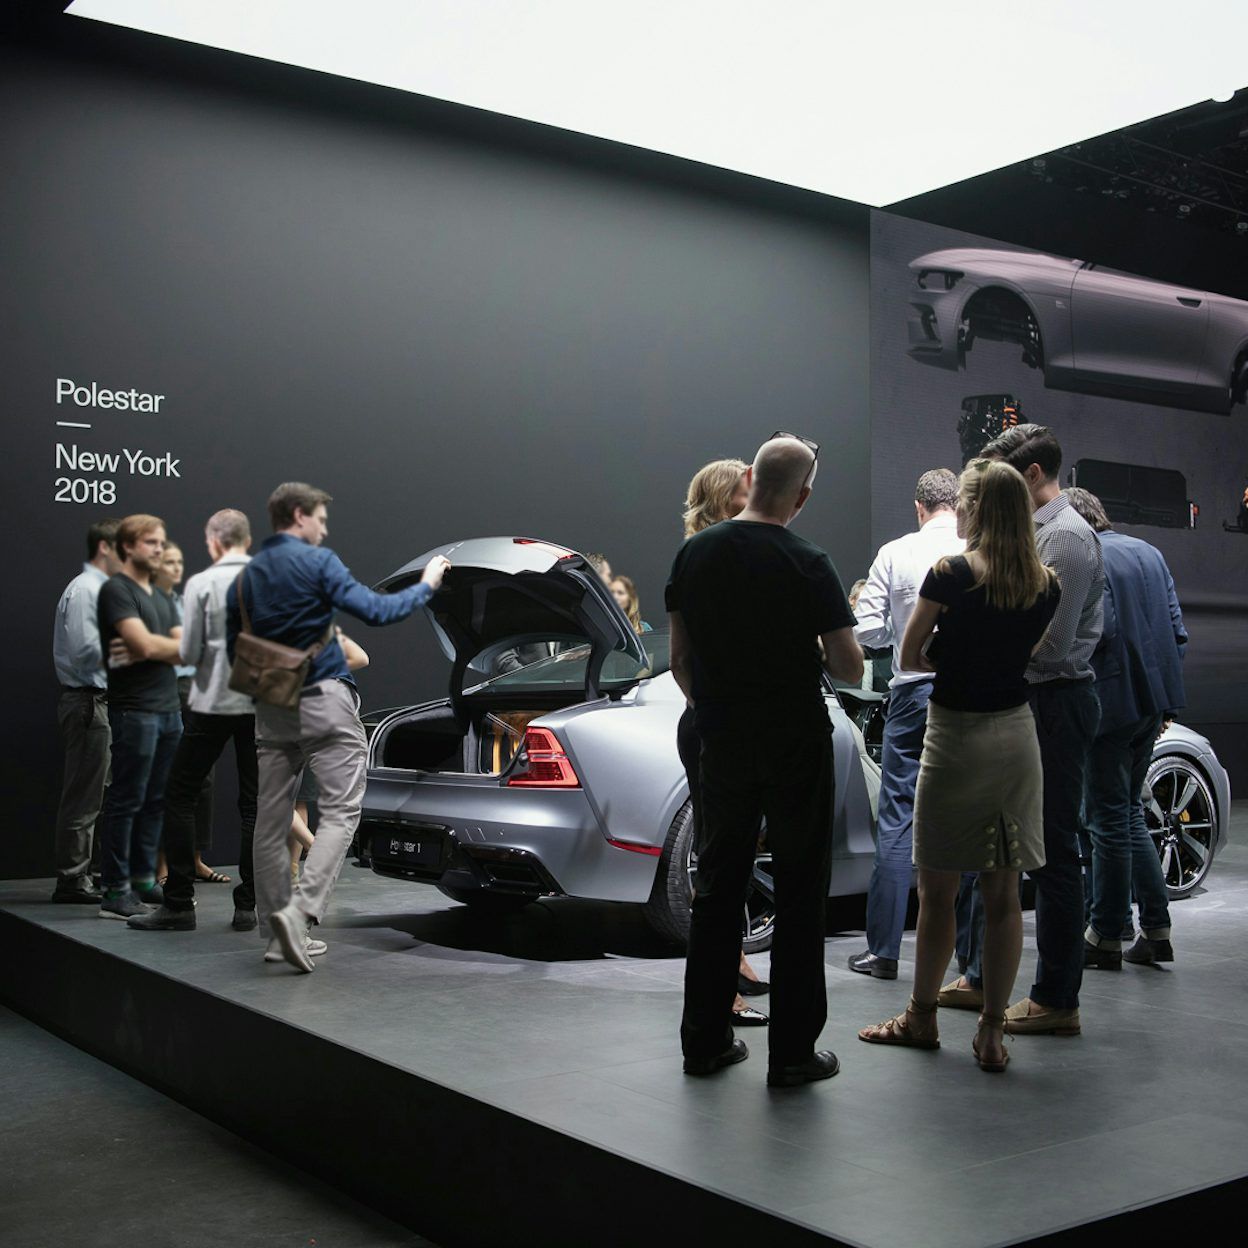 People gathered around a silver Polestar 1 on display at the Polestar New York event 2018.